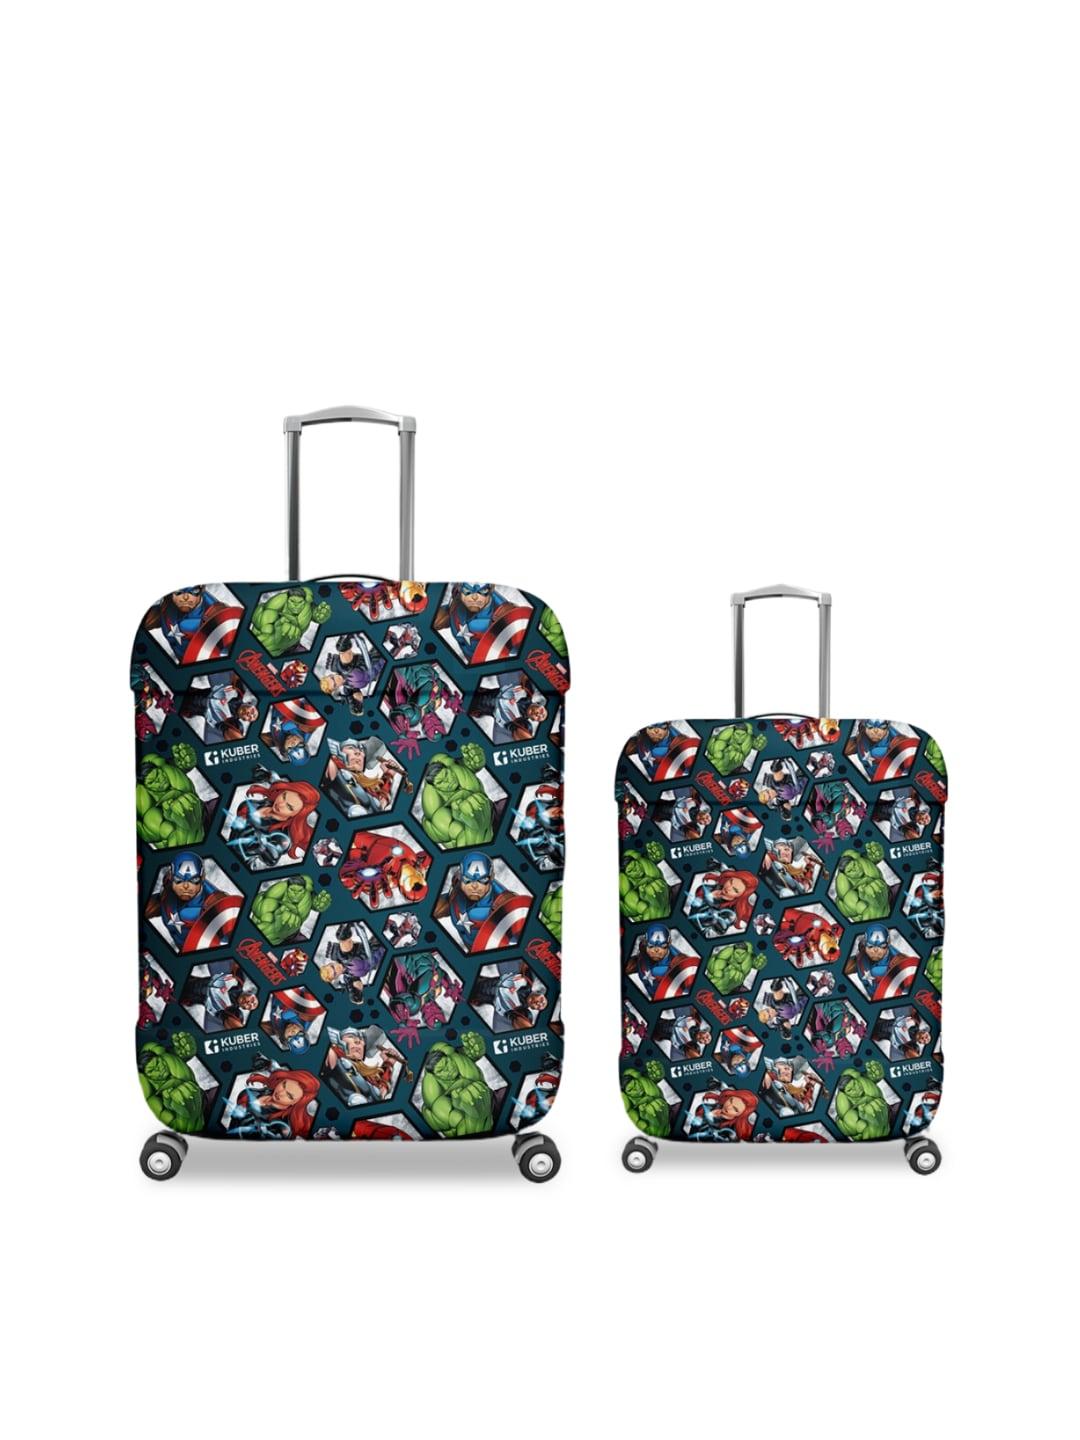 kuber industries set of 2 marvel avengers printed water resistance luggage cover